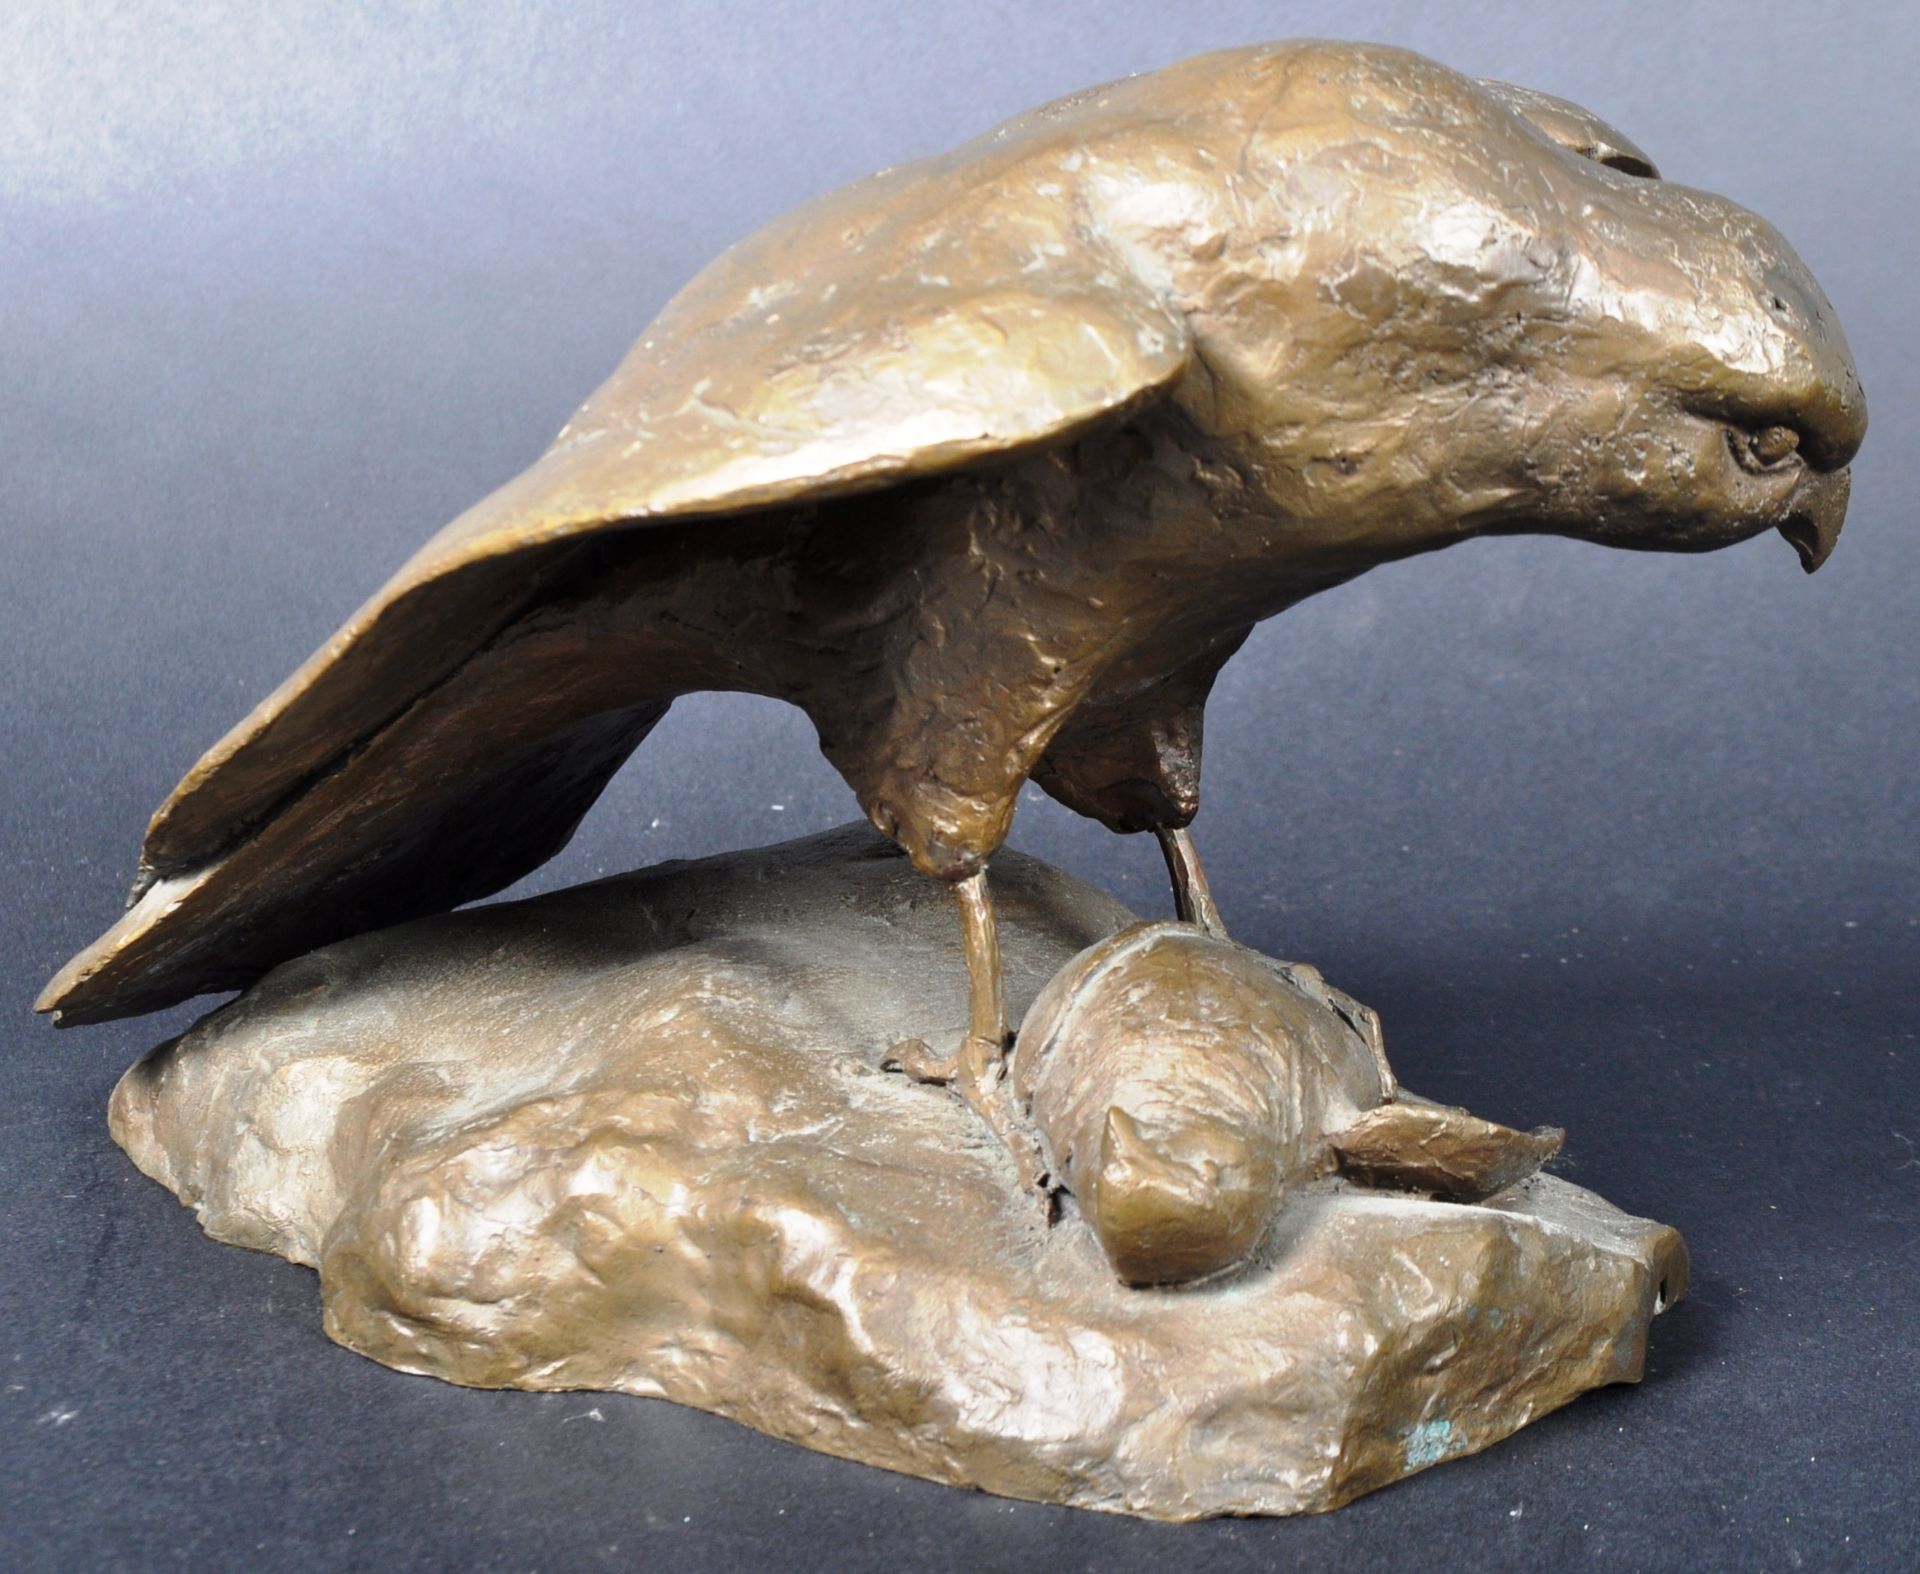 BRONZE STATUE FIGURE OF A FALCON STOOD UPON HIS PREY - Image 5 of 7